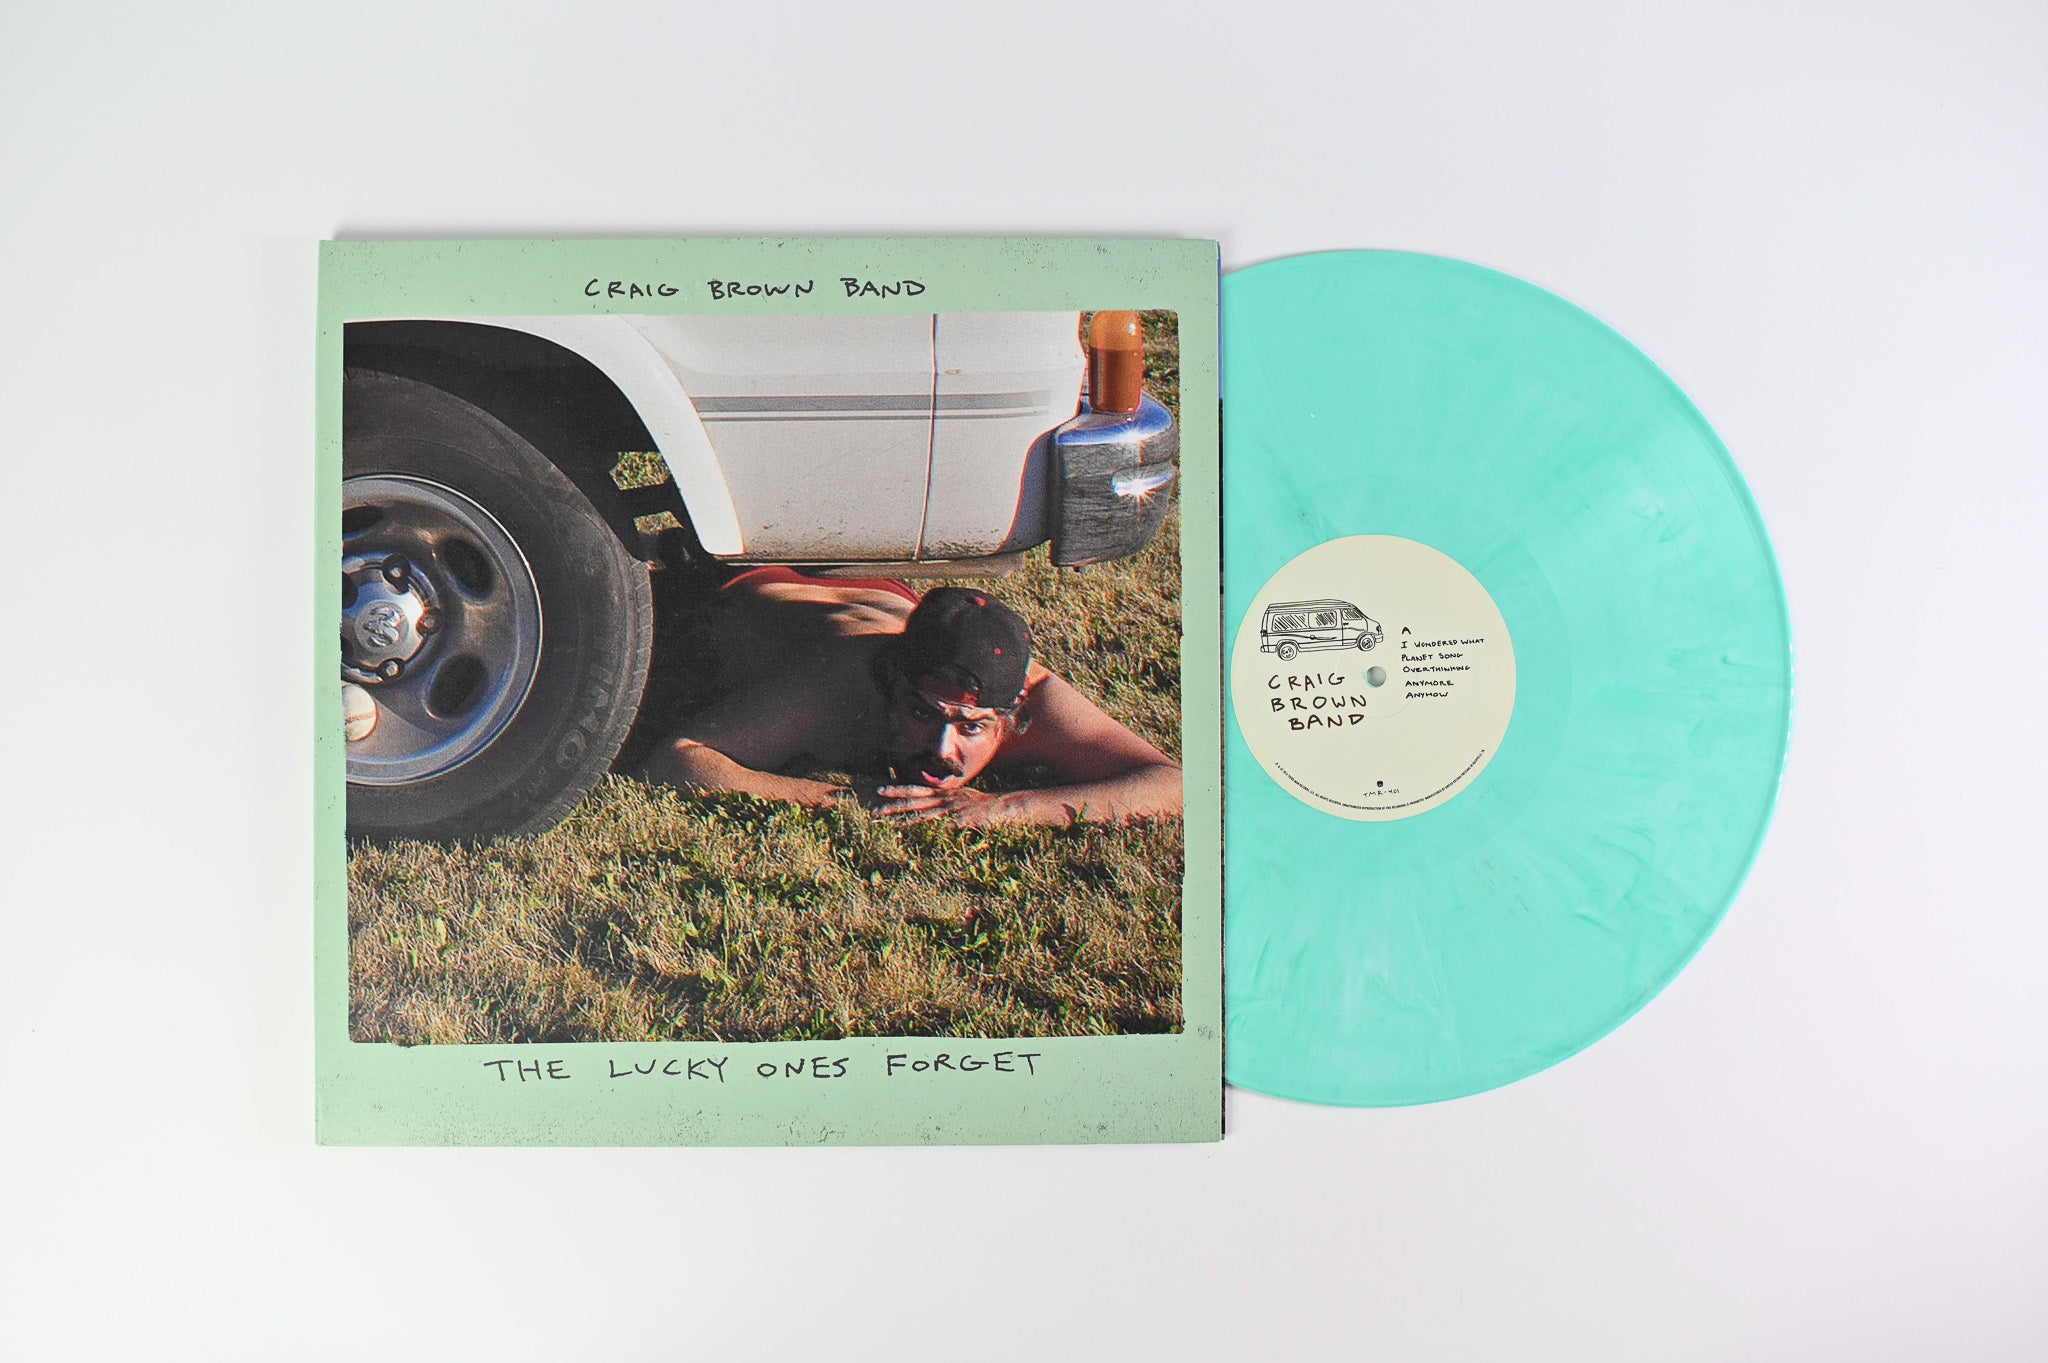 Craig Brown Band - The Lucky Ones Forget on Third Man Seafoam Vinyl